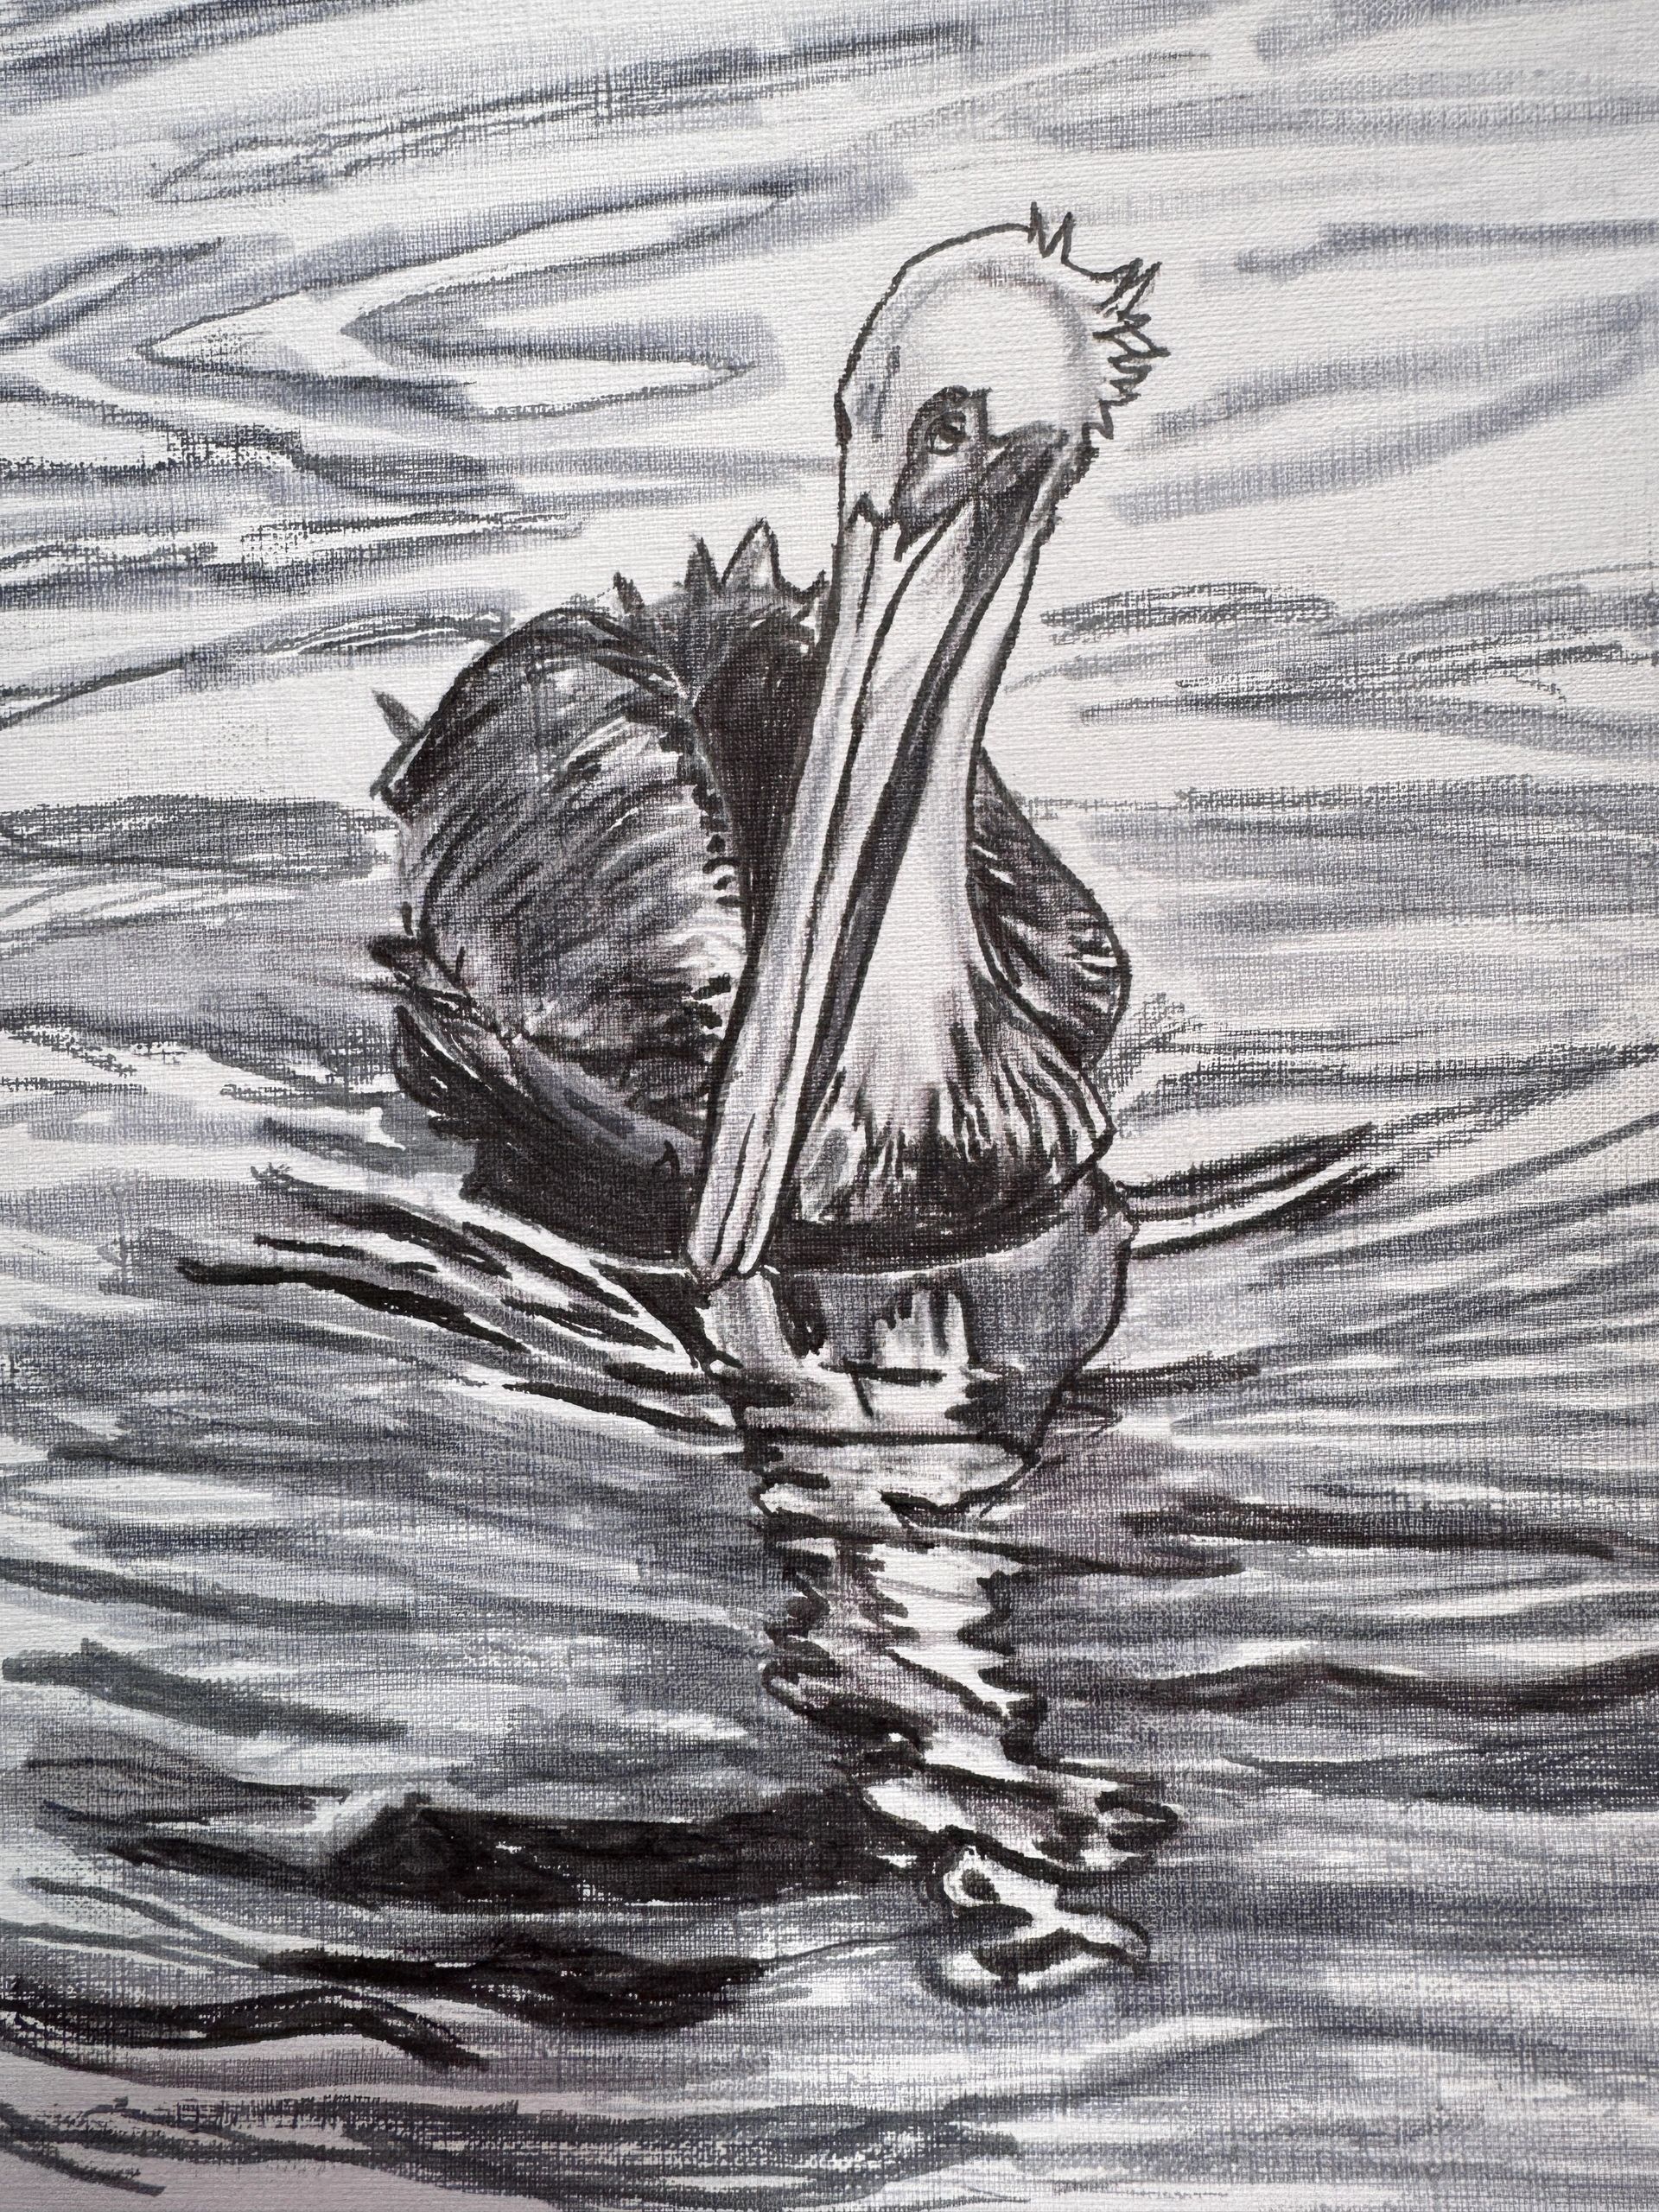 Pelican sketch from my photo ~ Soon to become a painting 